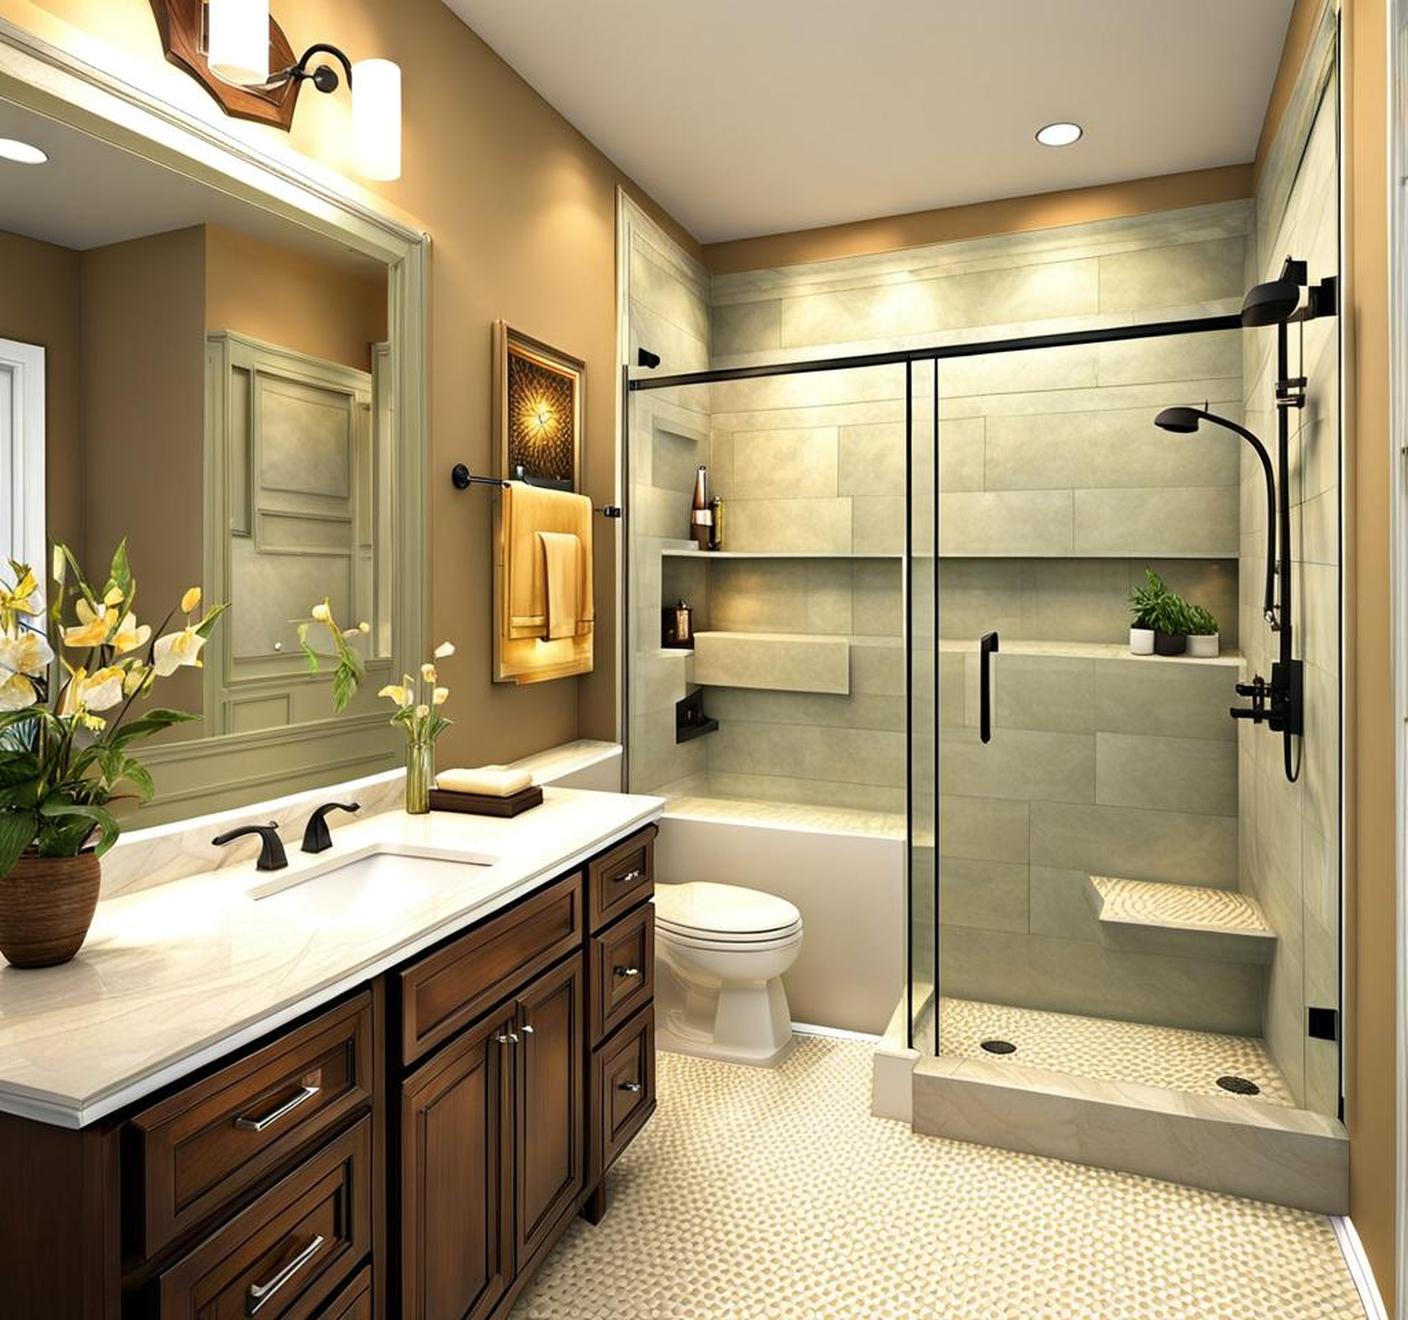 Make Your 5×8 Bathroom Feel Brand New With These Simple Remodeling Ideas